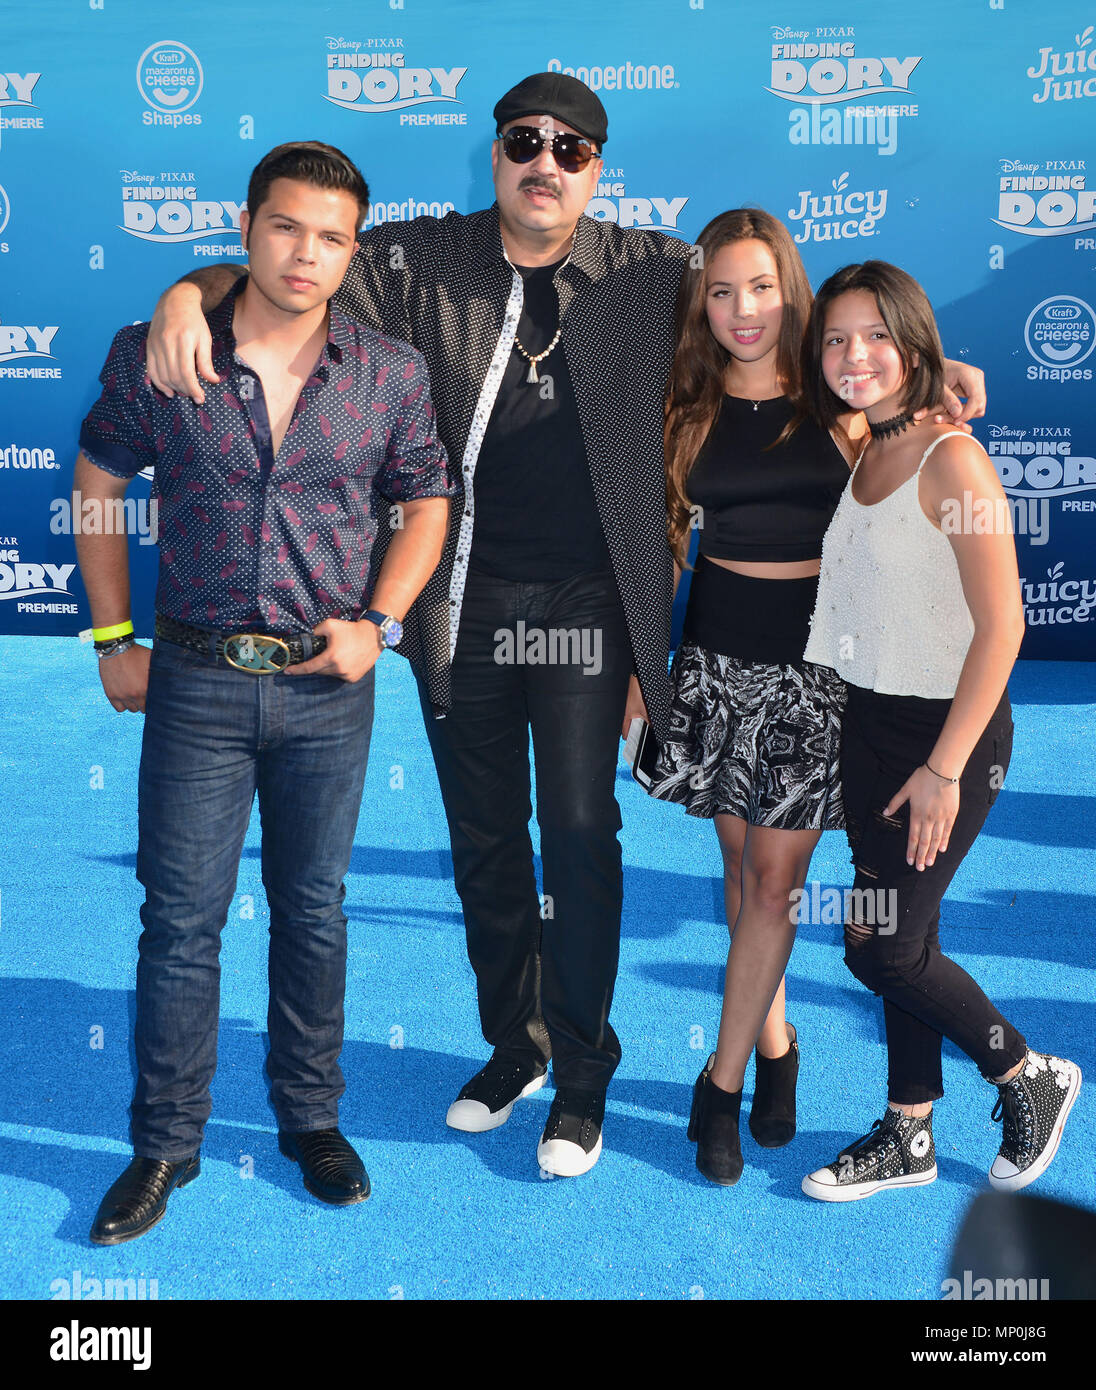 Pepe Aguilar and family   at the Finding Dory Premiere at the El Capitan Theatre in Los Angeles. June 7, 2016.Pepe Aguilar and family   ------------- Red Carpet Event, Vertical, USA, Film Industry, Celebrities,  Photography, Bestof, Arts Culture and Entertainment, Topix Celebrities fashion /  Vertical, Best of, Event in Hollywood Life - California,  Red Carpet and backstage, USA, Film Industry, Celebrities,  movie celebrities, TV celebrities, Music celebrities, Photography, Bestof, Arts Culture and Entertainment,  Topix, vertical,  family from from the year , 2016, inquiry tsuni@Gamma-USA.com  Stock Photo